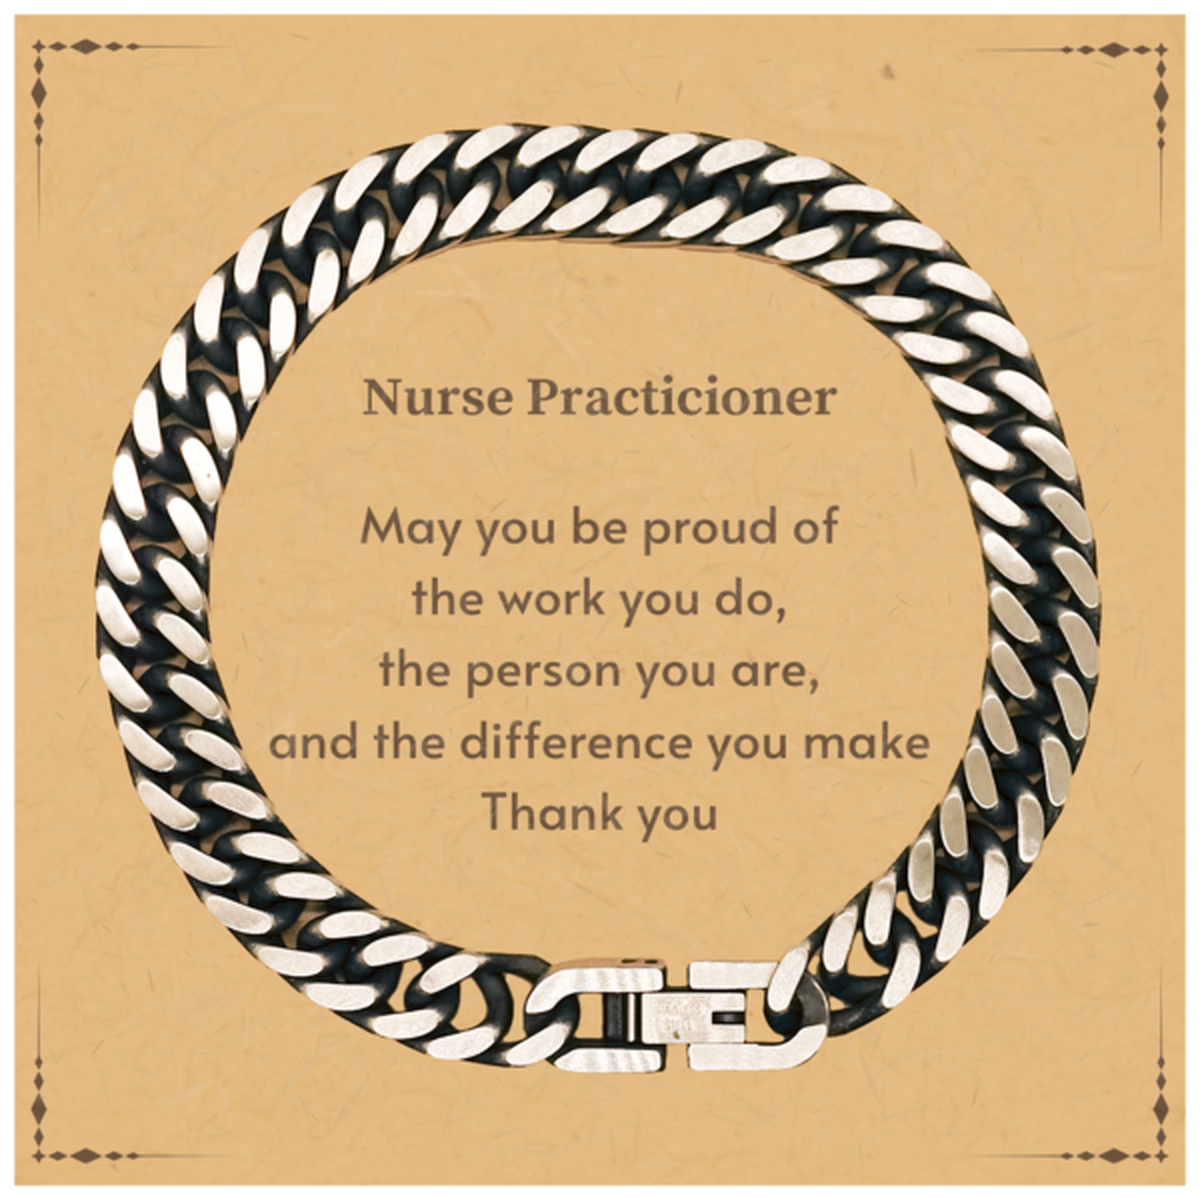 Heartwarming Cuban Link Chain Bracelet Retirement Coworkers Gifts for Nurse Practicioner, Nurse Practicioner May You be proud of the work you do, the person you are Gifts for Boss Men Women Friends